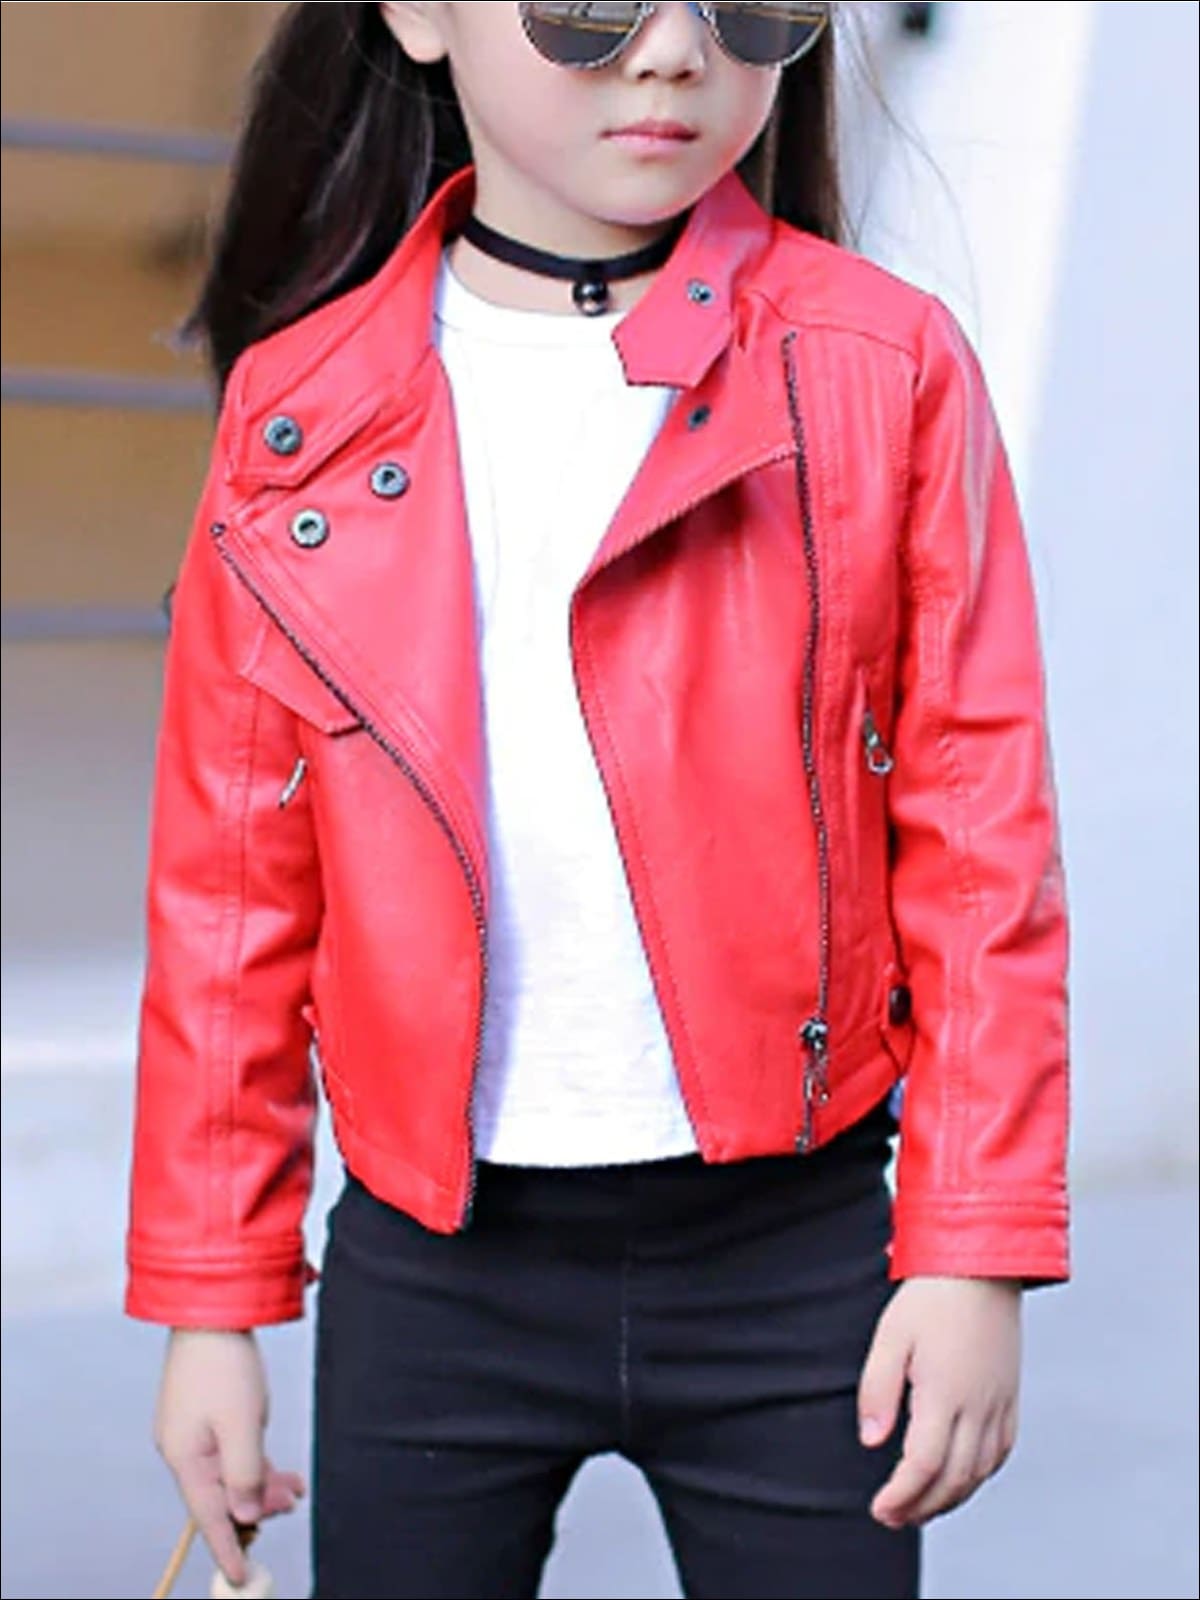 Girls Fall Synthetic Leather Jacket - Red / 4T - Girls Jacket